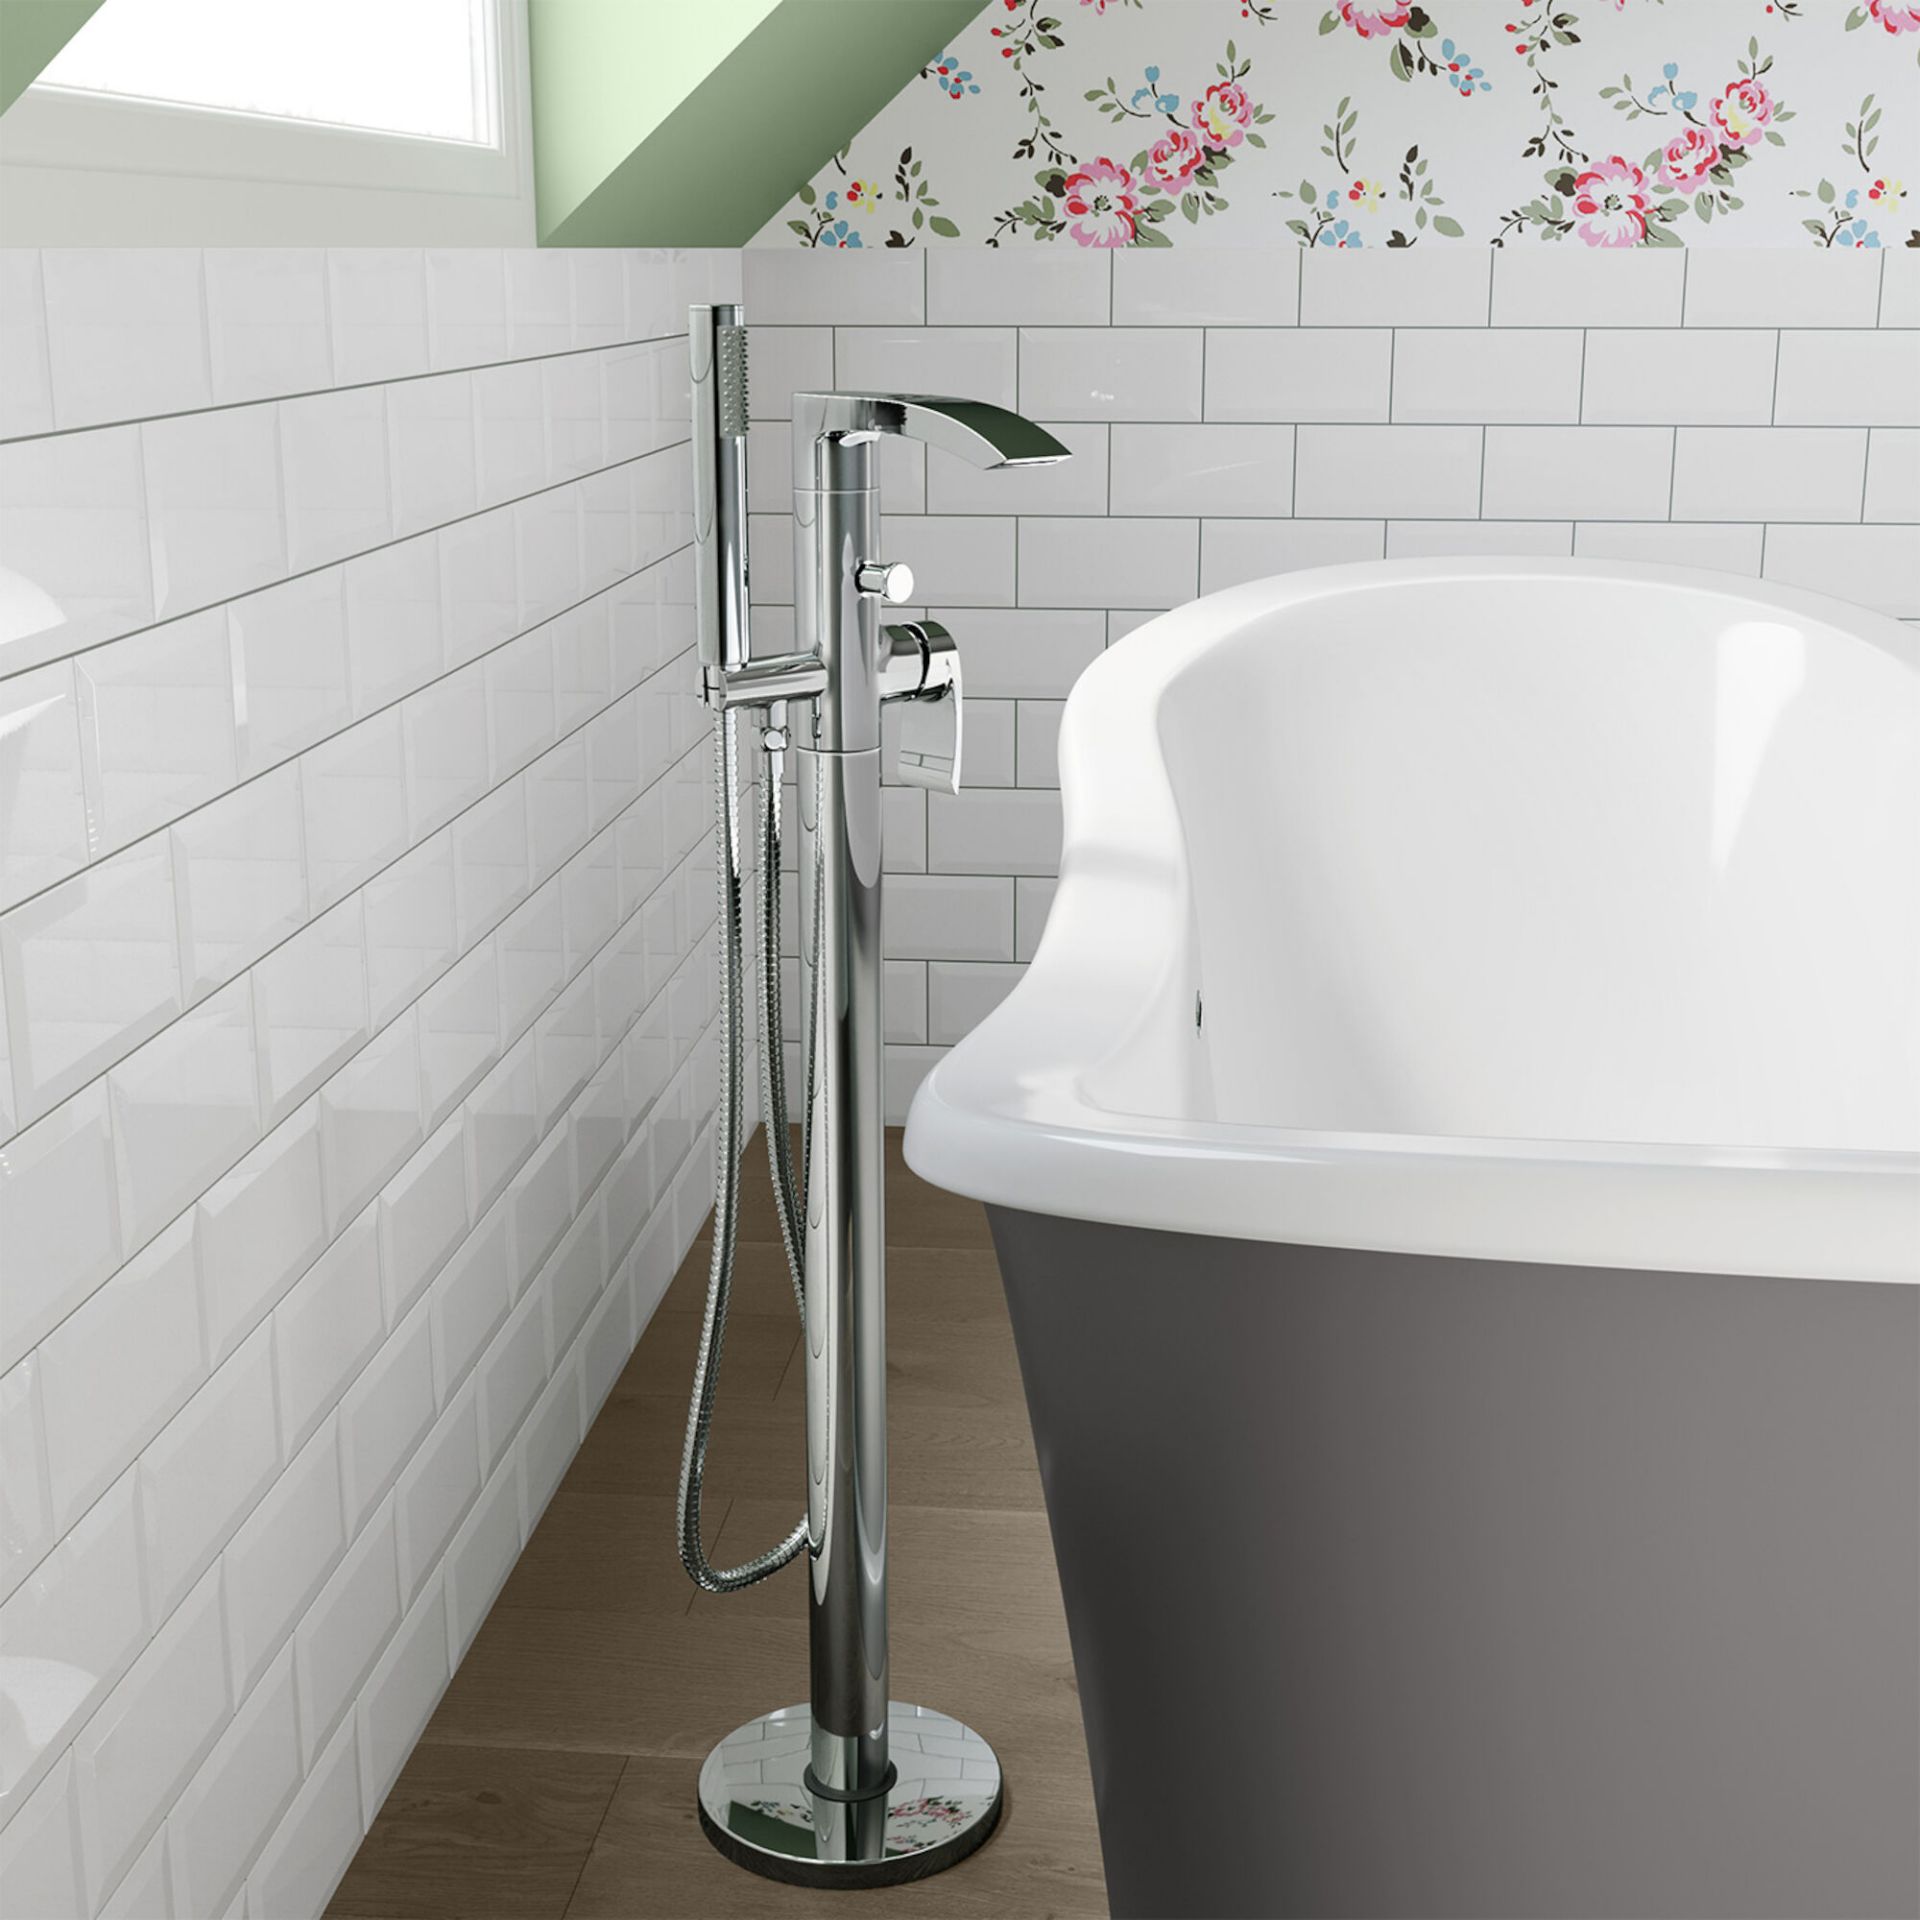 (KL5) Melbourne Chrome Freestanding Bath Tap with Hand Held Shower. RRP £474.99. We love this